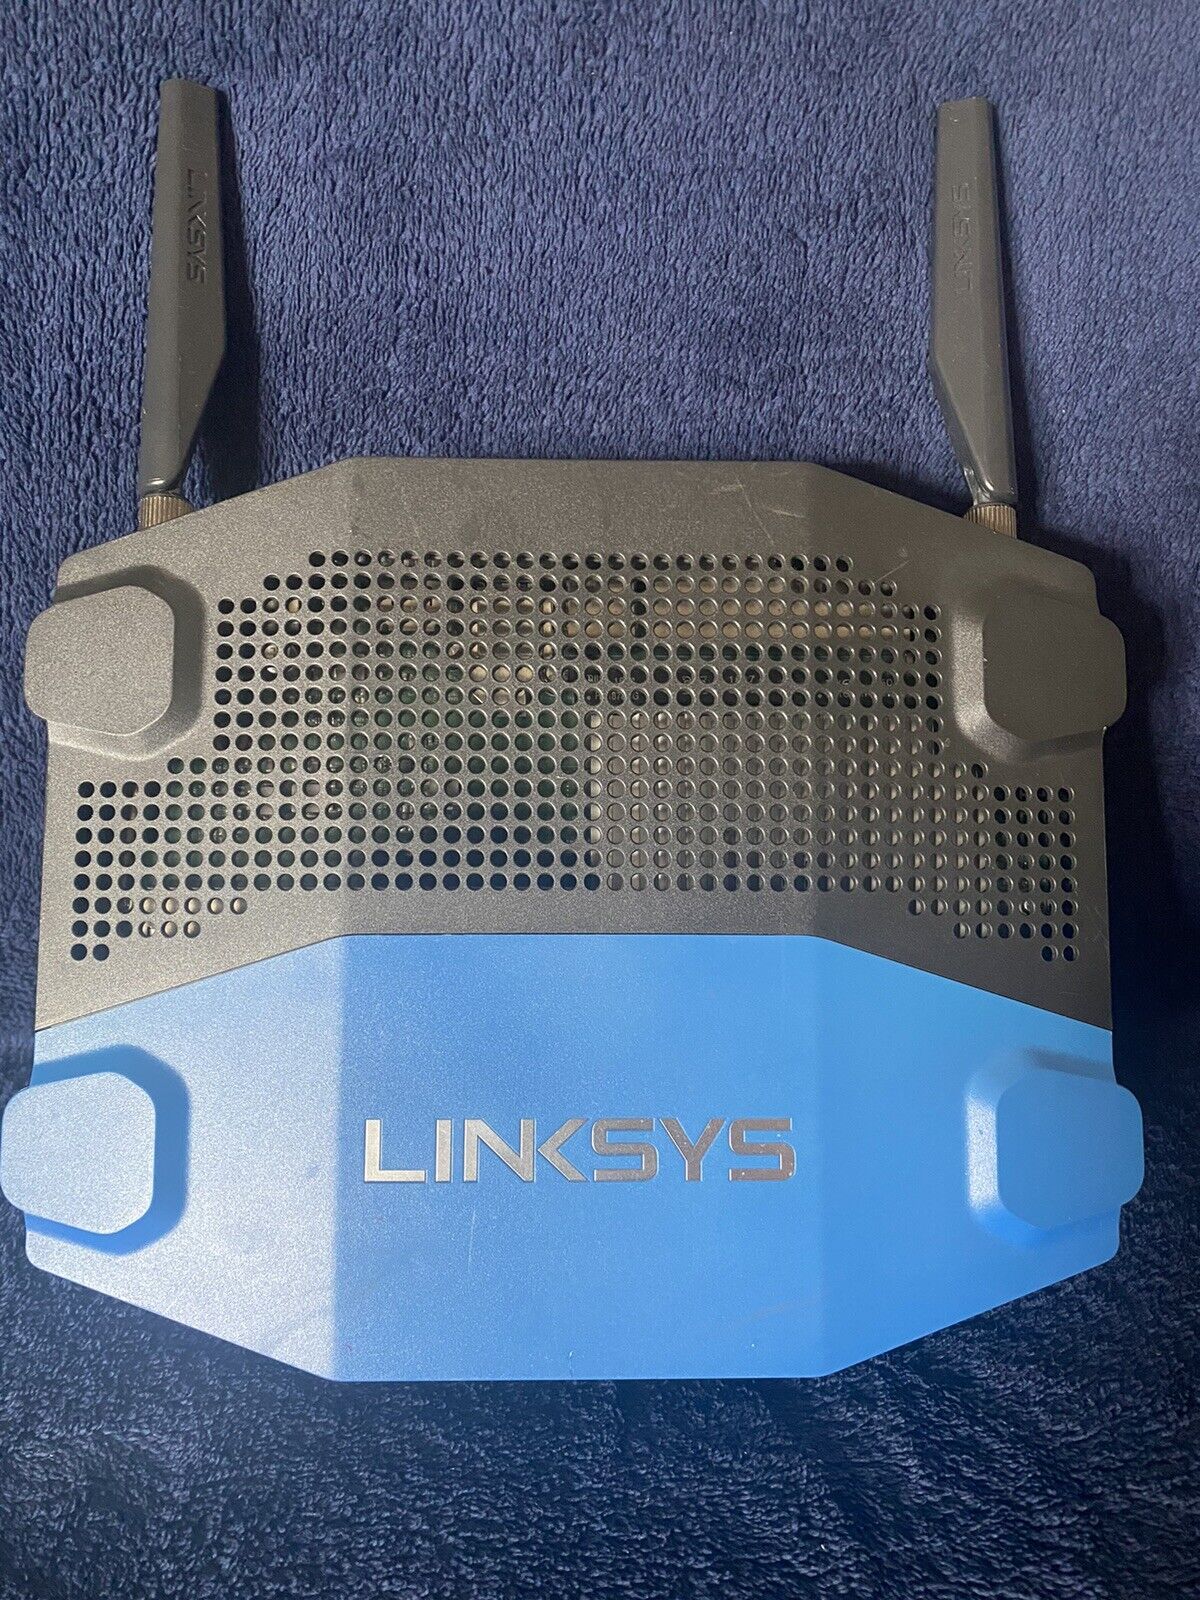 Linksys WRT1200AC Router - UNTESTED PARTS